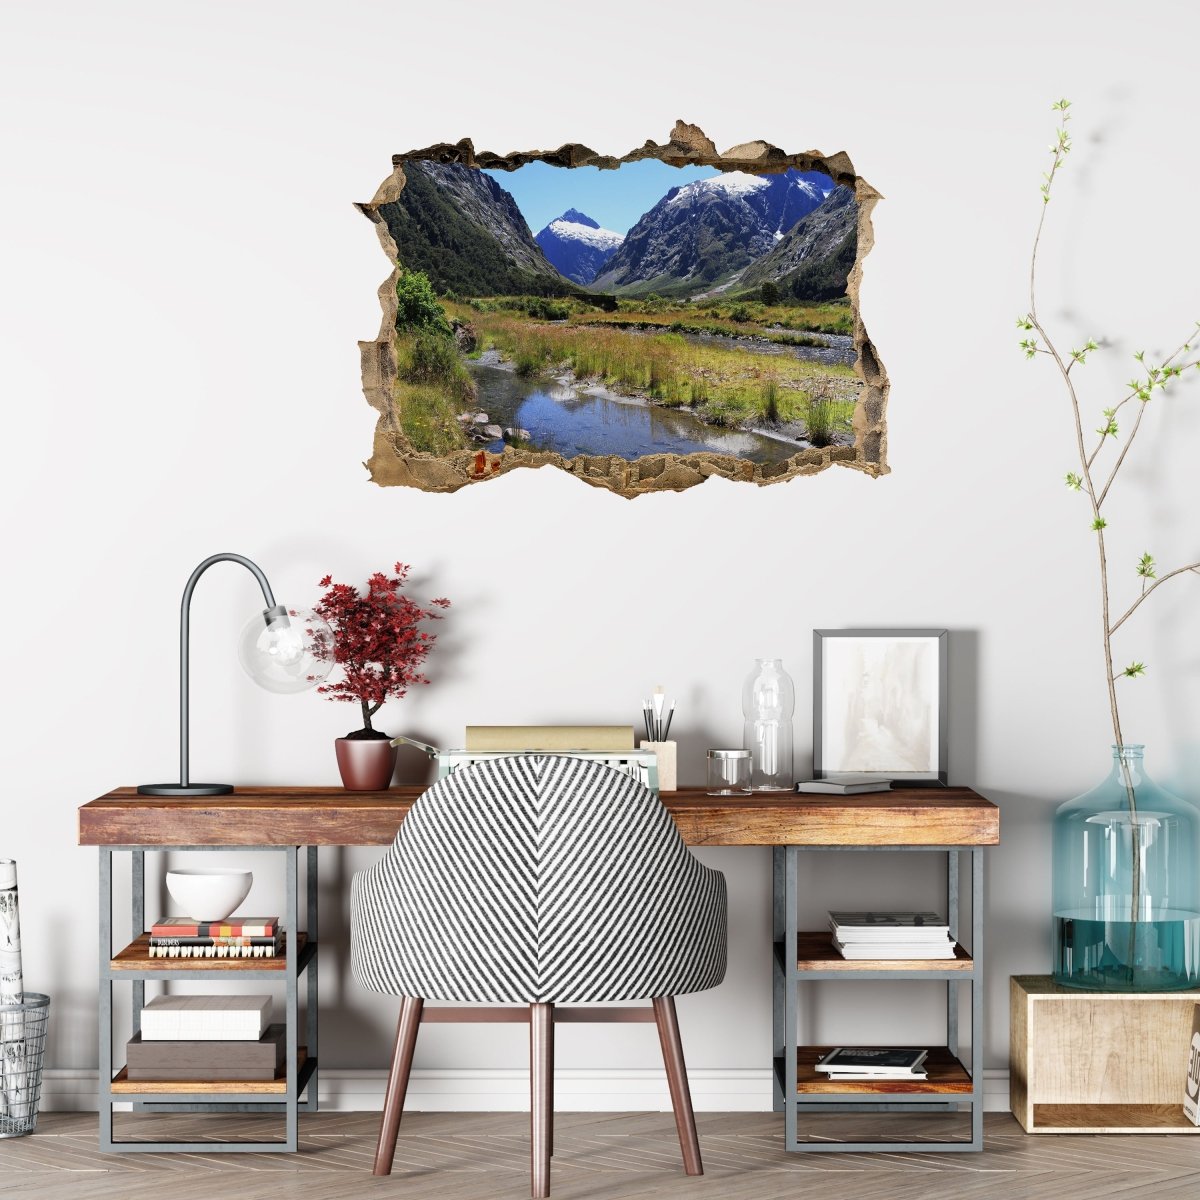 3D wall sticker fjord landscape nature - Wall Decal M0214